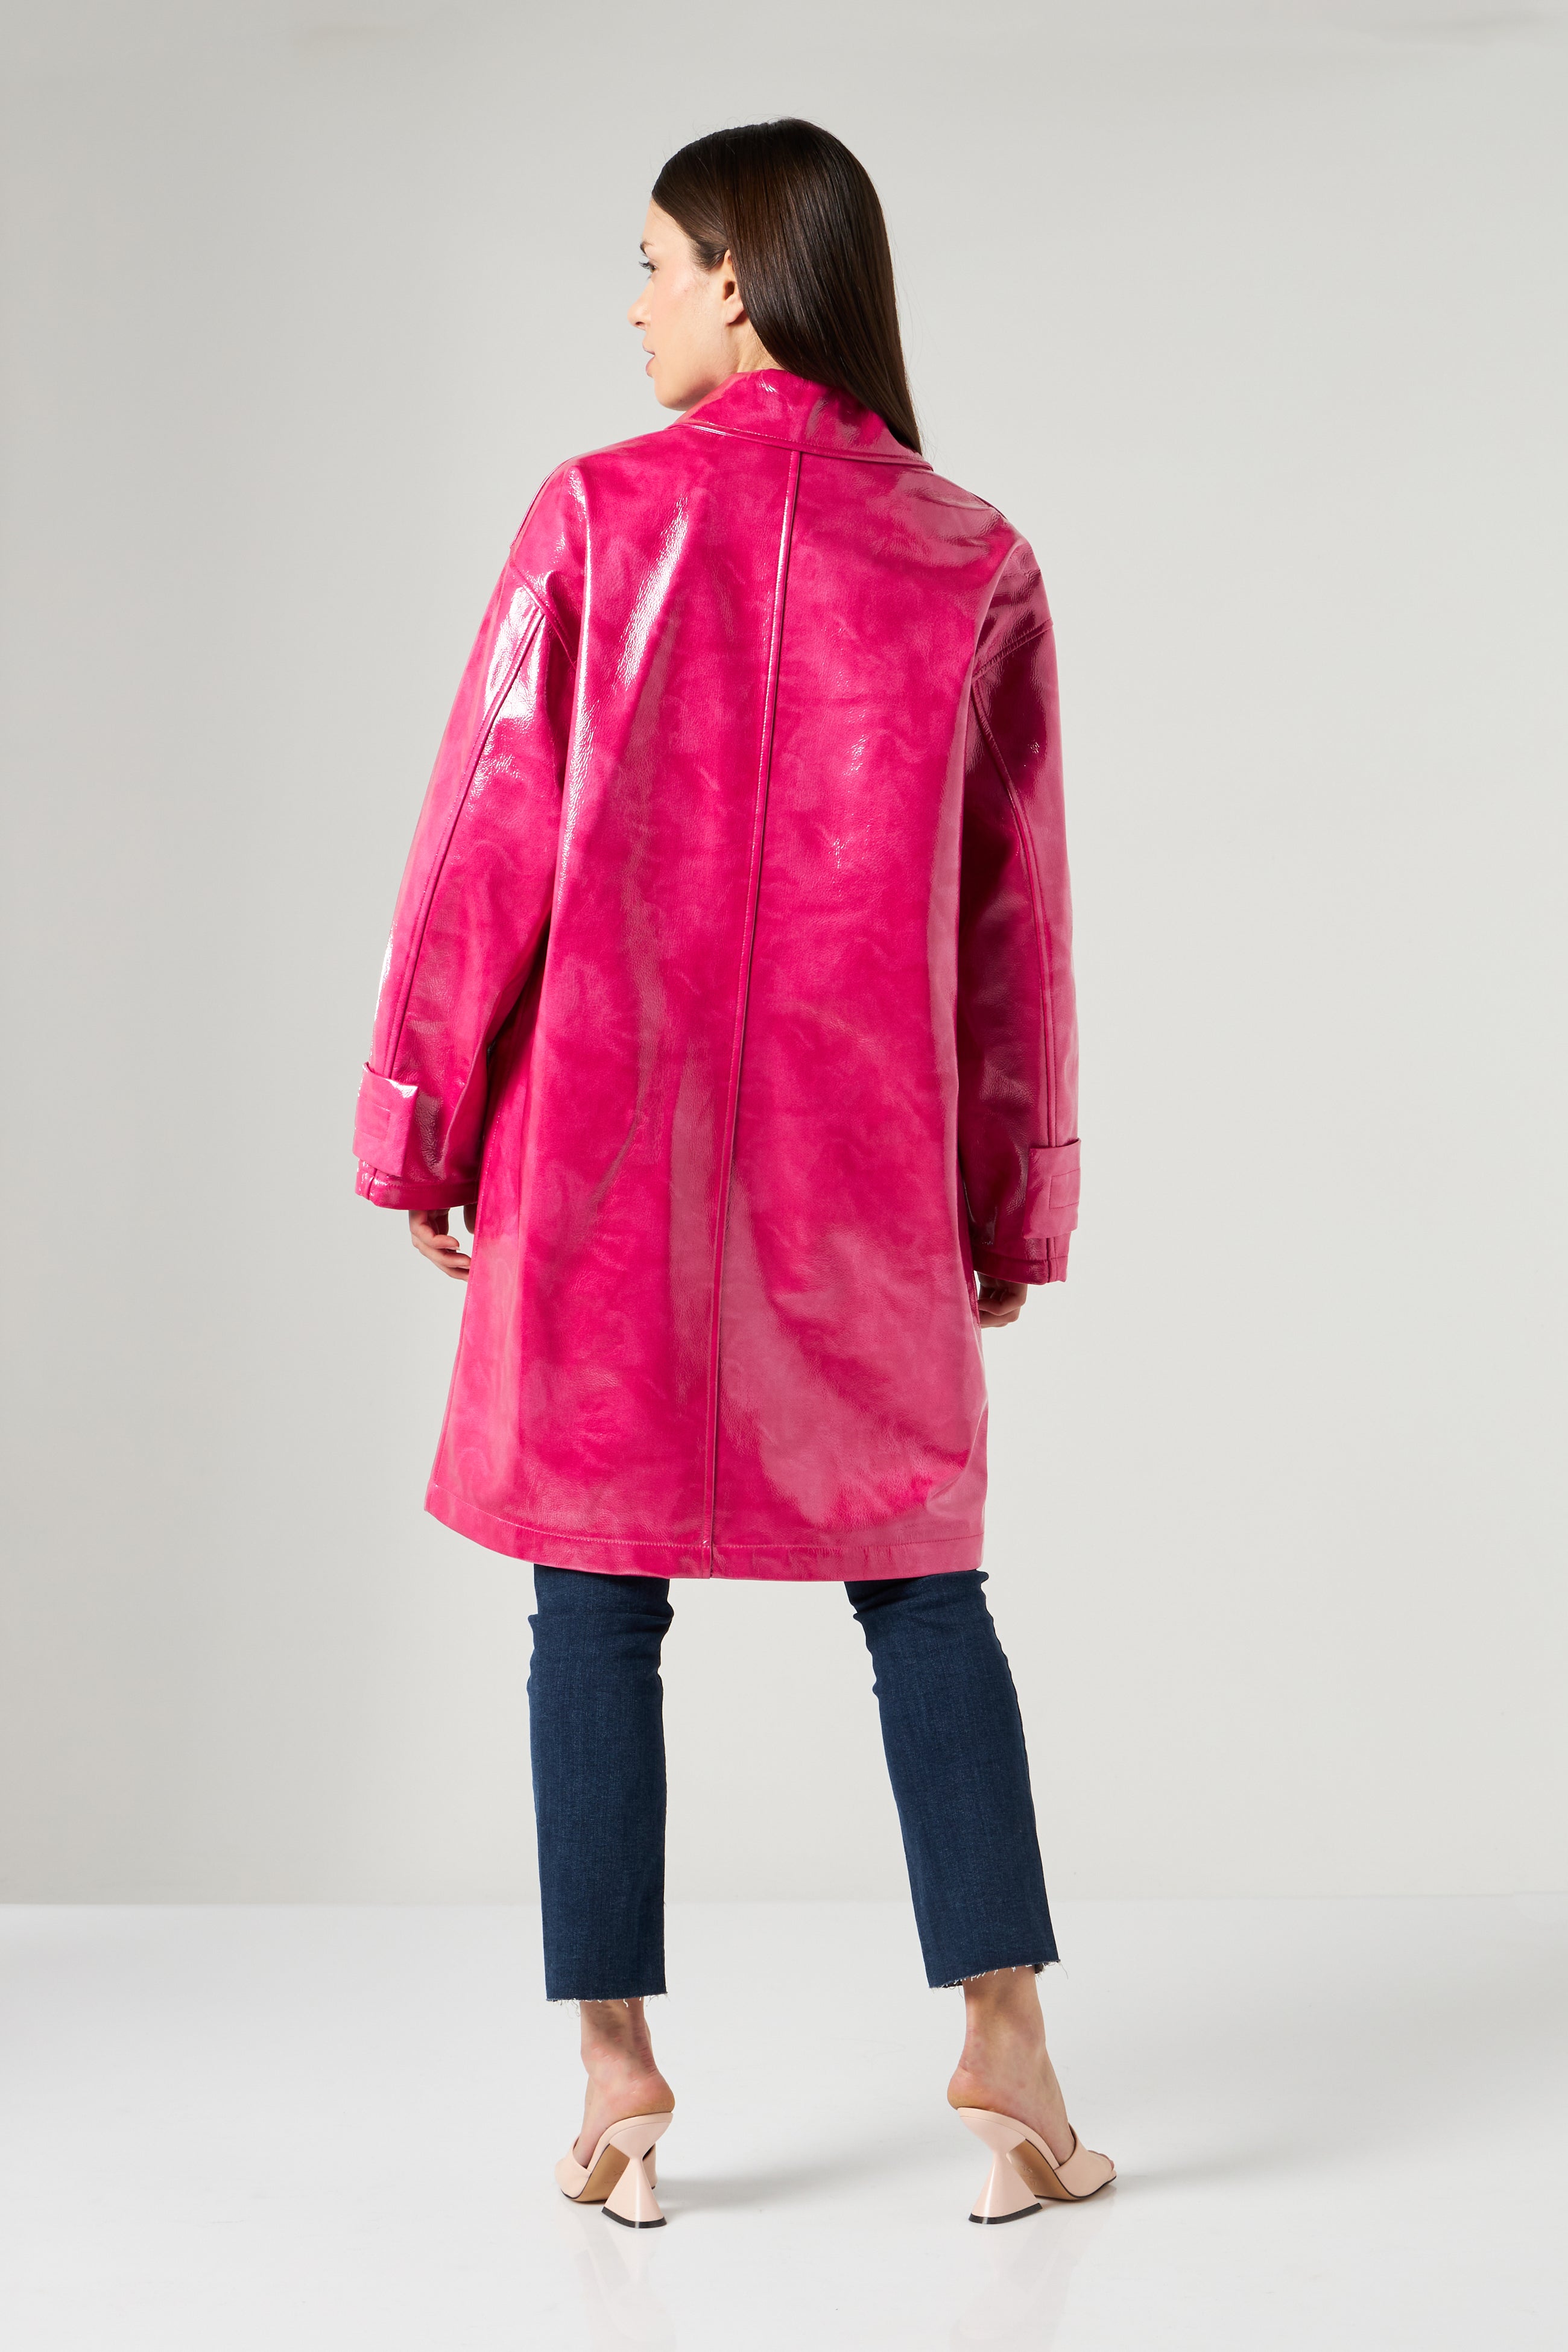 STAND STUDIO Long Jacket Conni Sour Raspberry